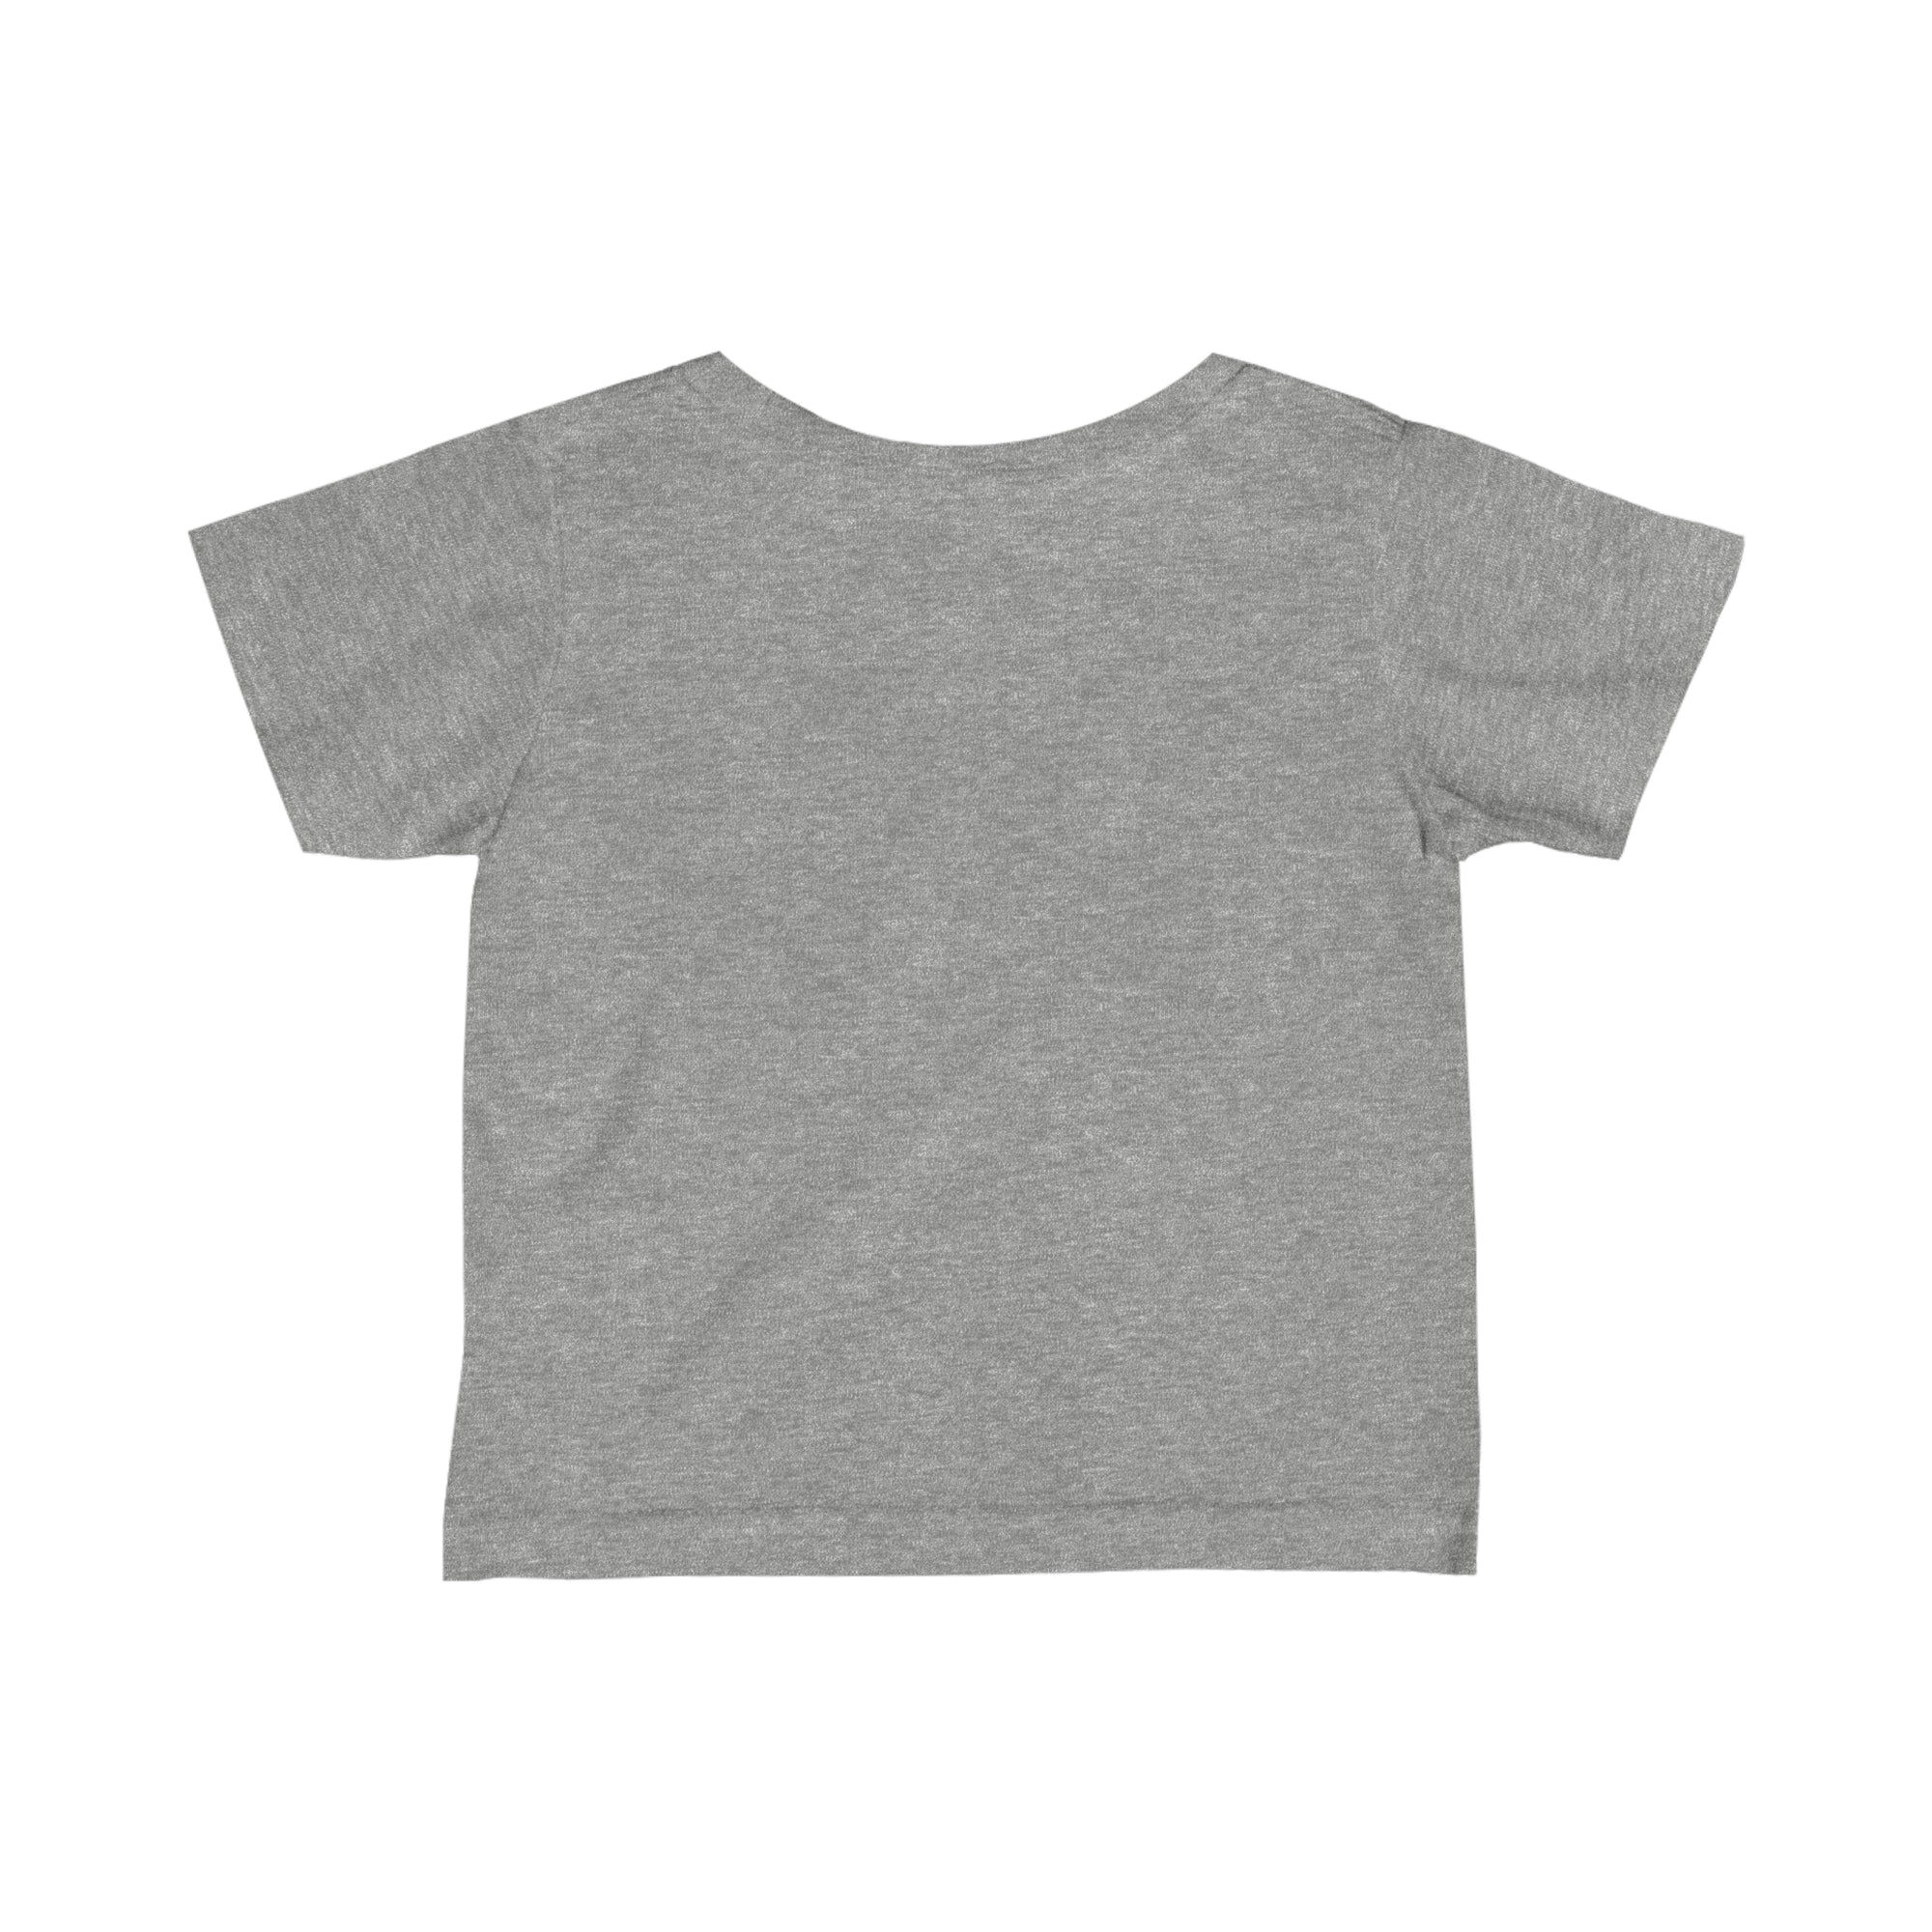 Infant Fine Jersey Tee - Keep Calm and Shell On